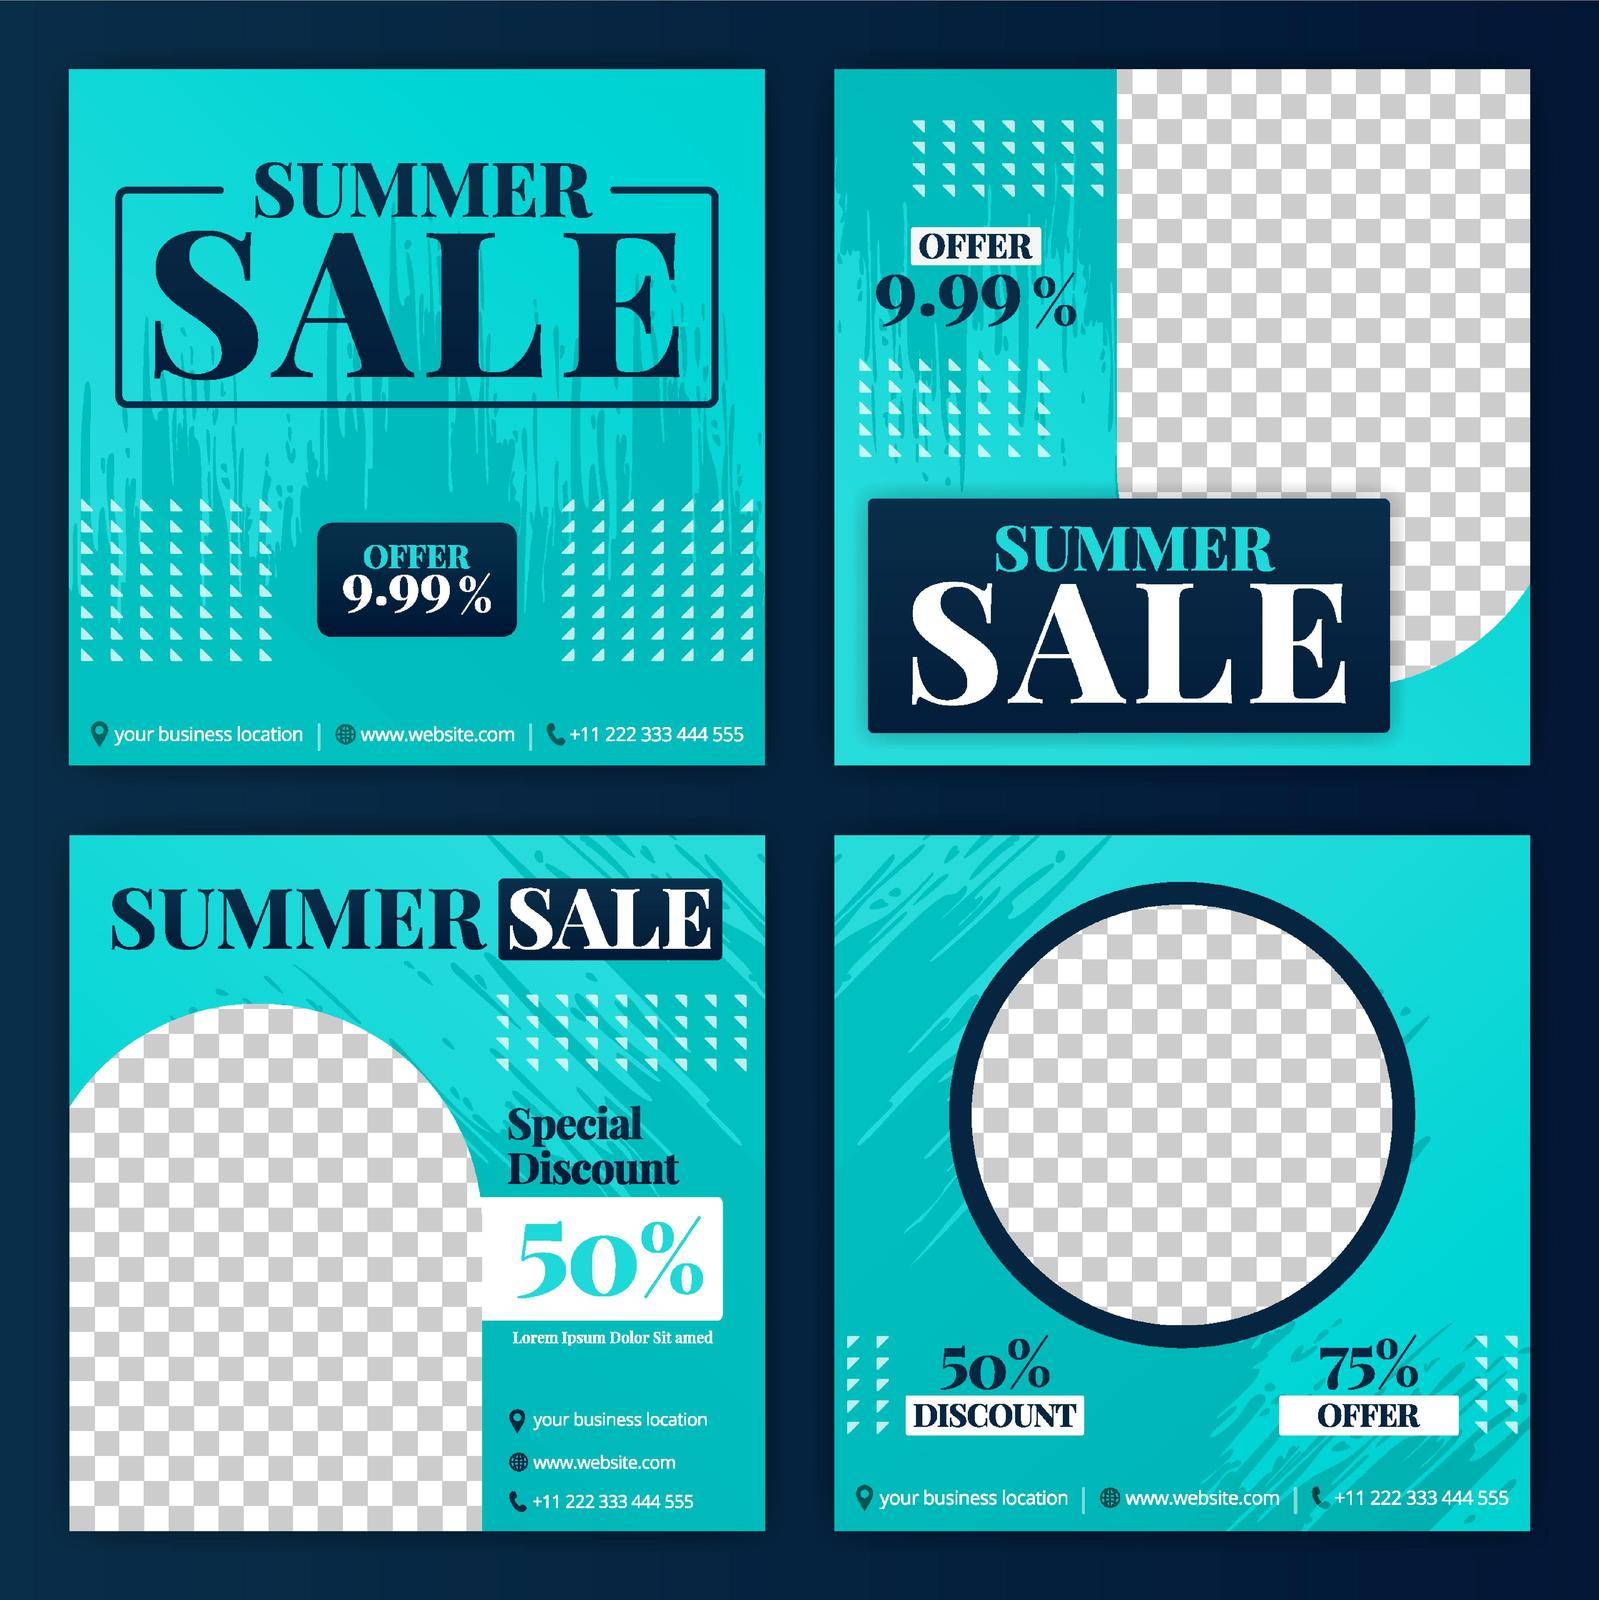 social media post for summer sale in June. new normal sale in summer season ads and promotions. social media marketing during a pandemic. the design can be used for website, post, stories and feed